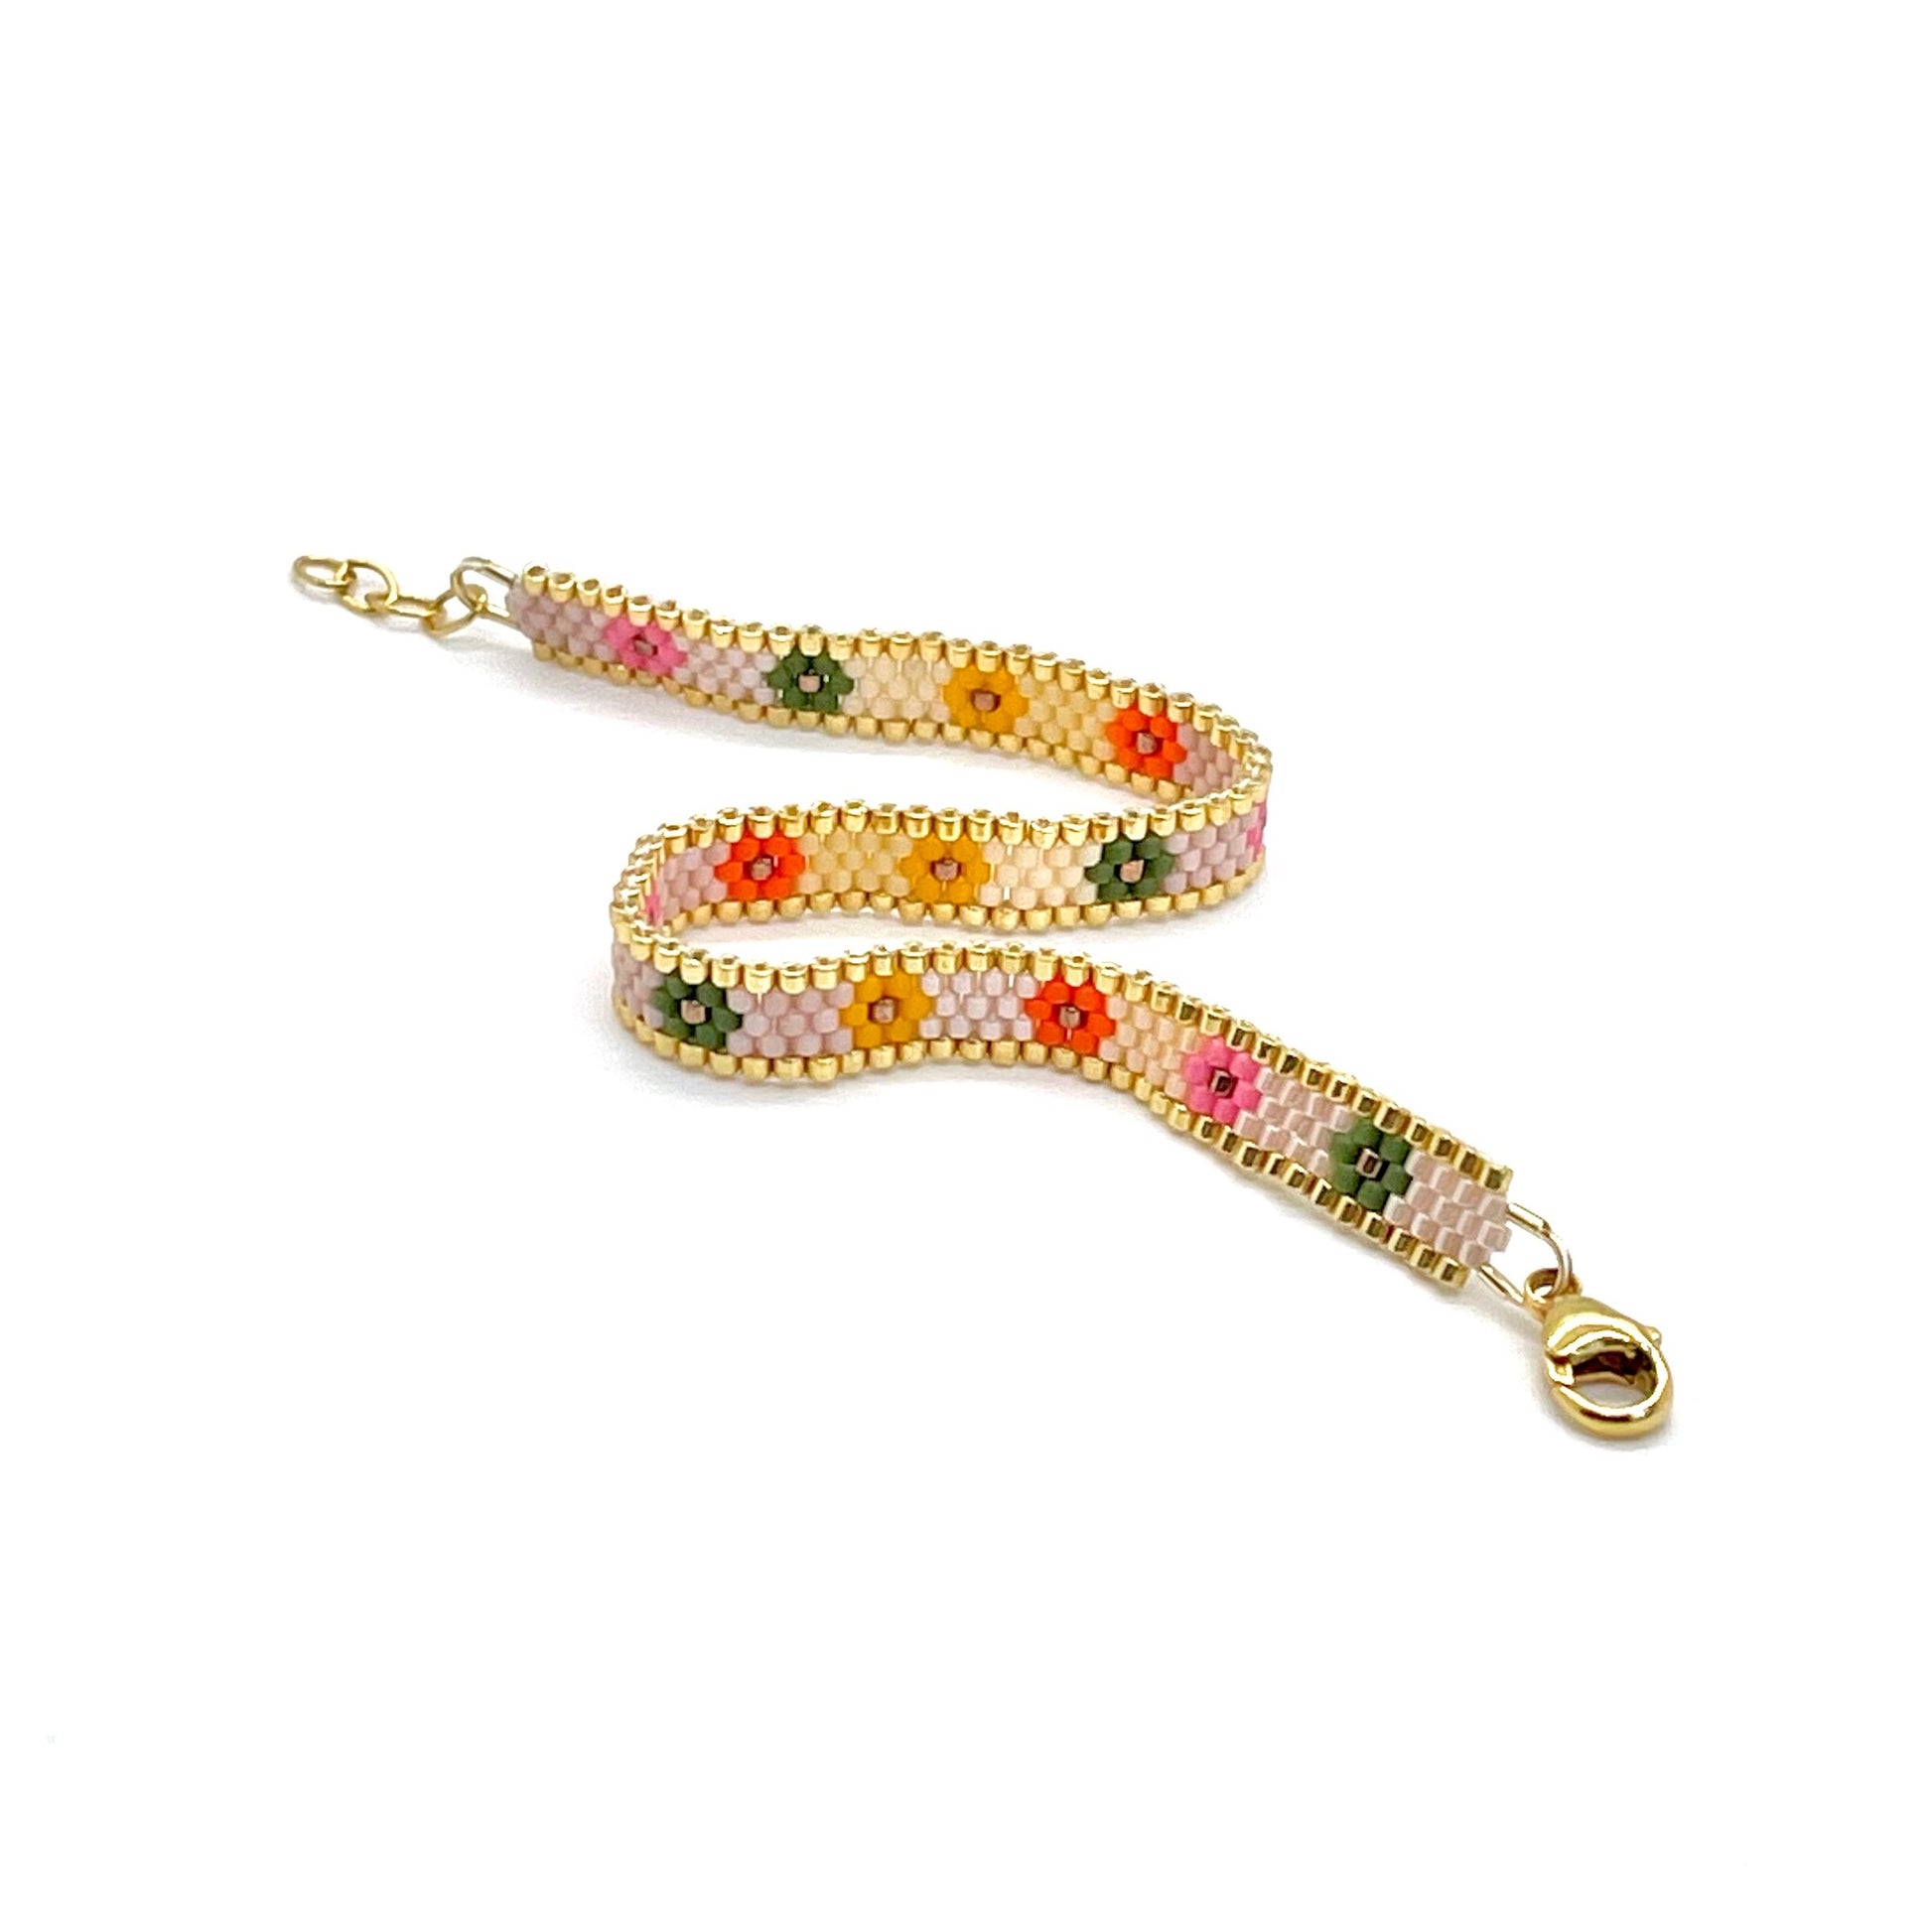 Flower bead bracelet with pink, green, orange, and yellow seed beads. Flat woven peyote stitch beaded daisy bracelet.